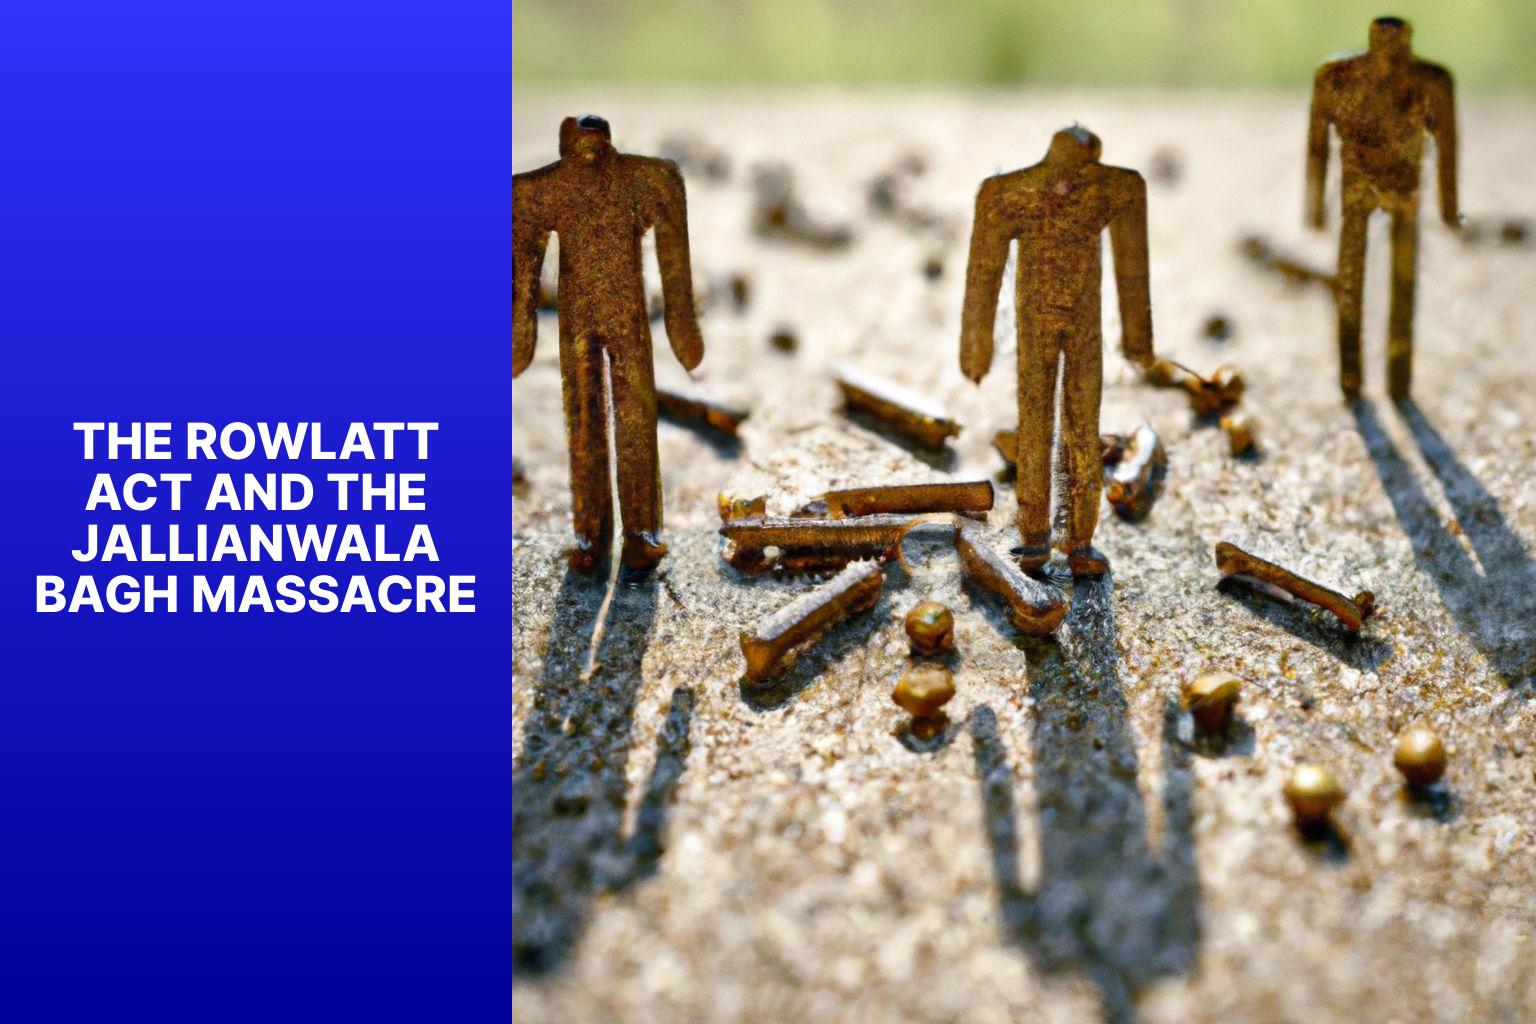 The Rowlatt Act and the Jallianwala Bagh Massacre - How was the social and political situation of India affected by the First World War? 